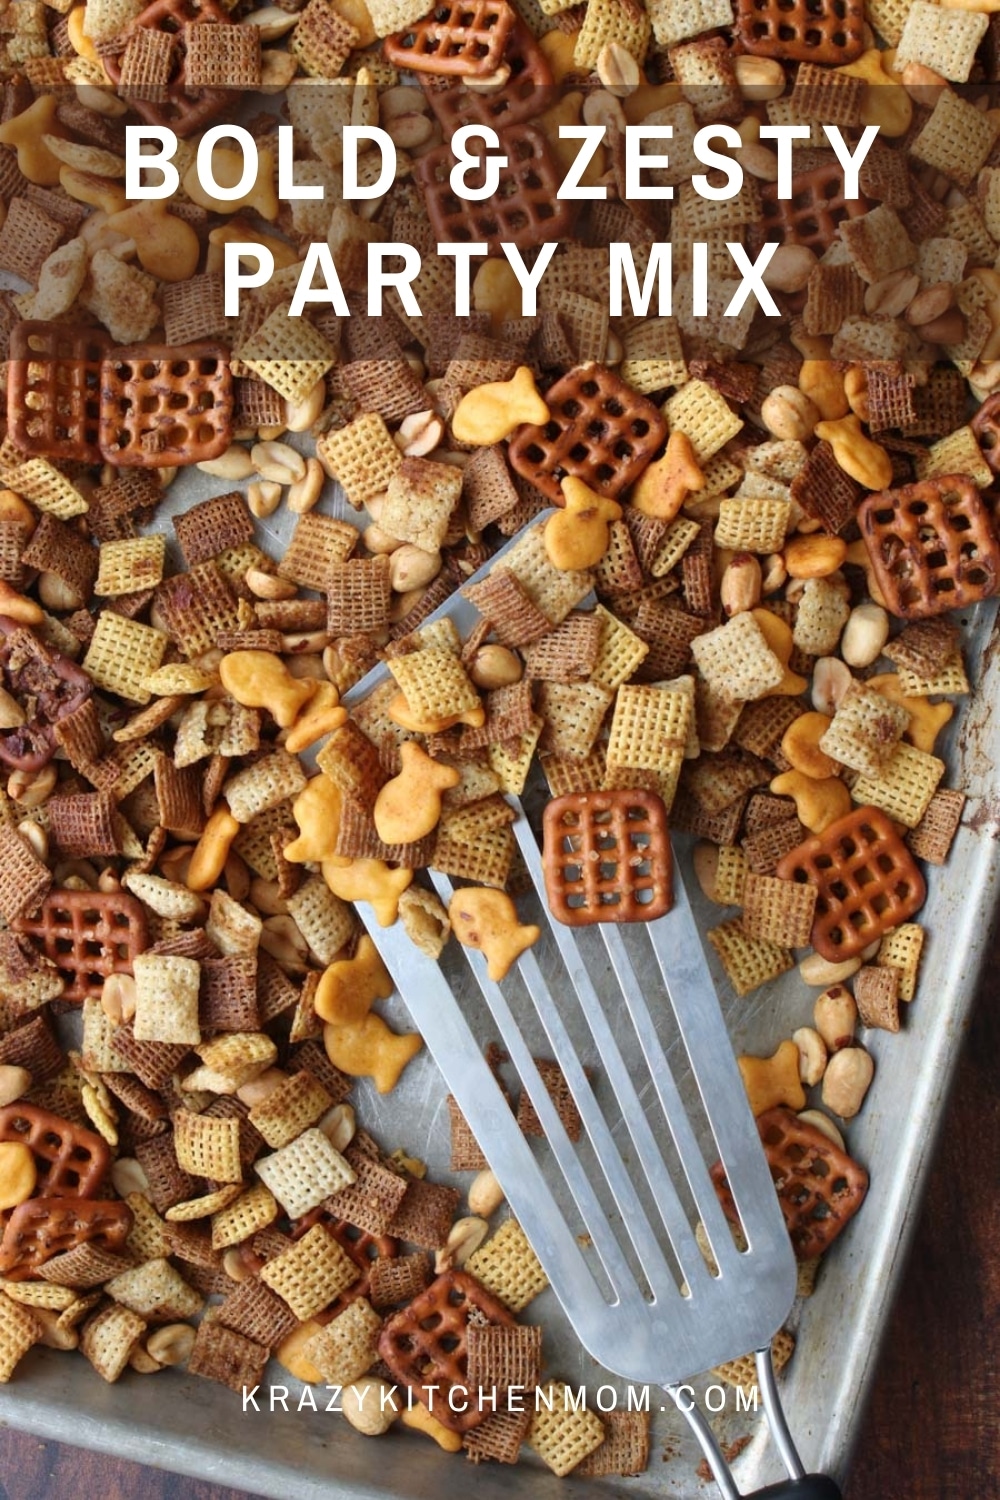 Bold, zesty, buttery, crunchy, salty party mix is a fan favorite at our house. It's my bolder zestier version of a classic party mix snack that really gets the party started.  via @krazykitchenmom